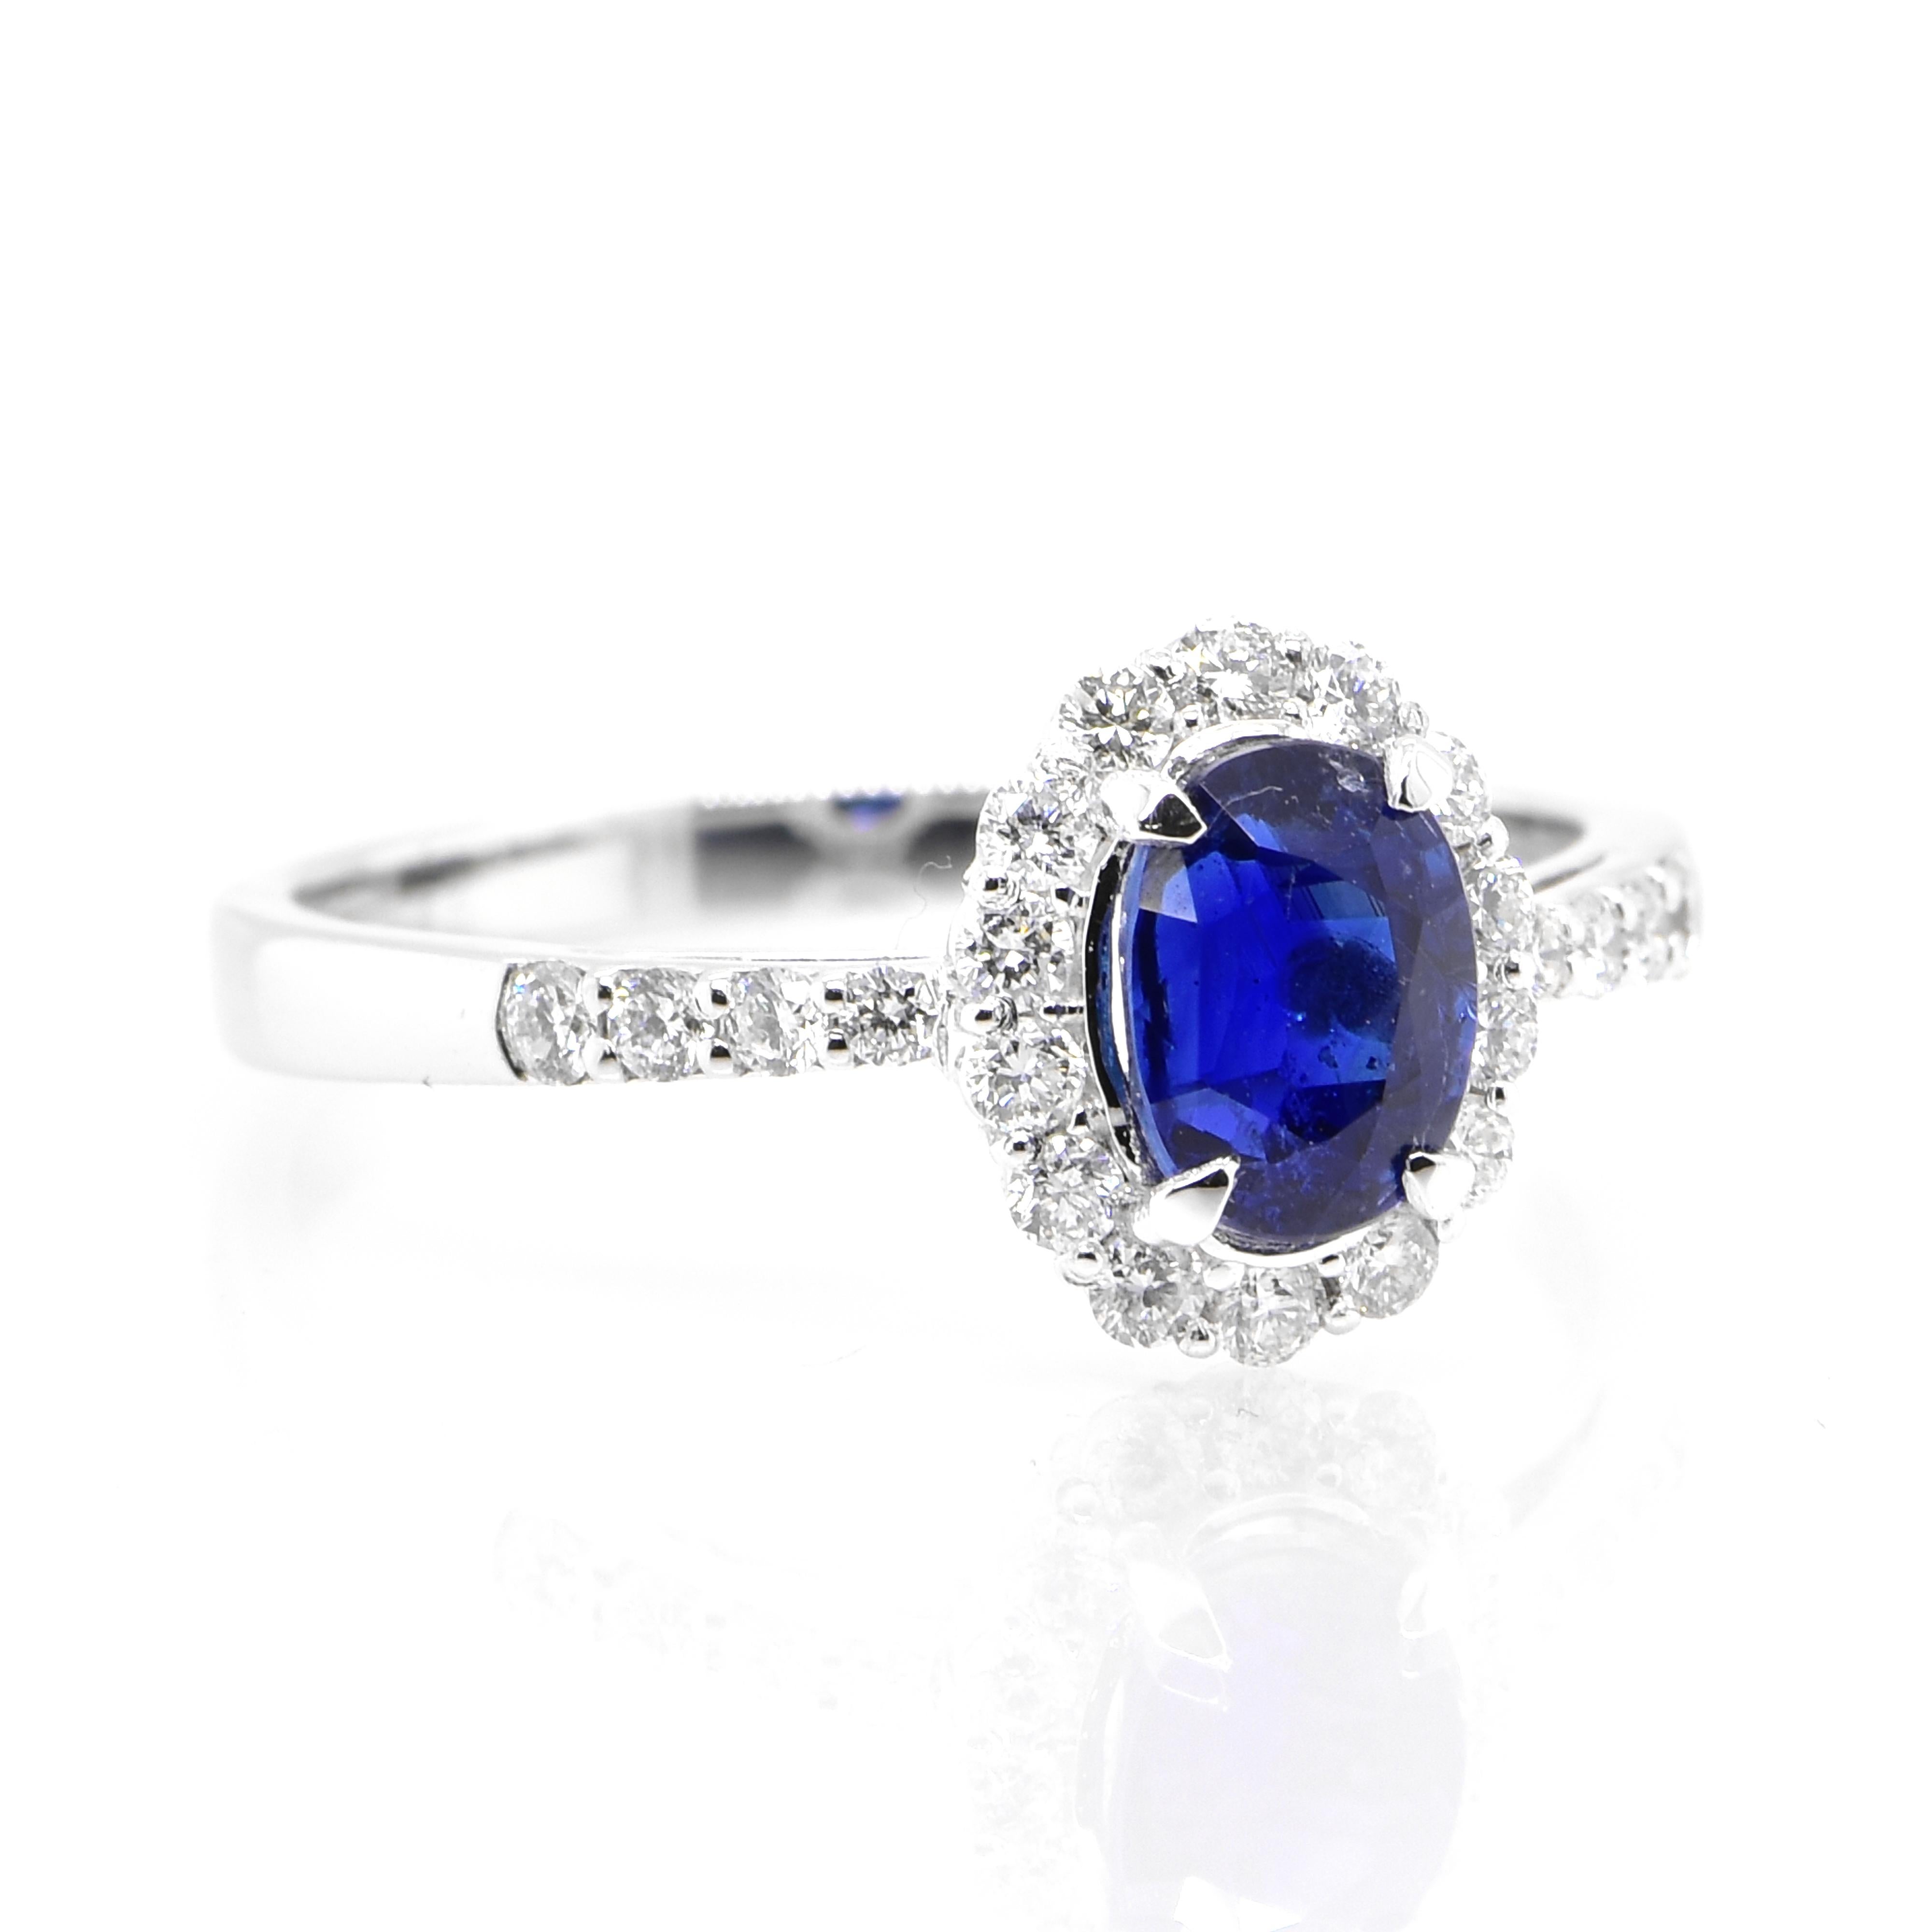 Modern 1.07 Carat, Unheated, Royal Blue Color Sapphire and Diamond Ring Set in Platinum For Sale